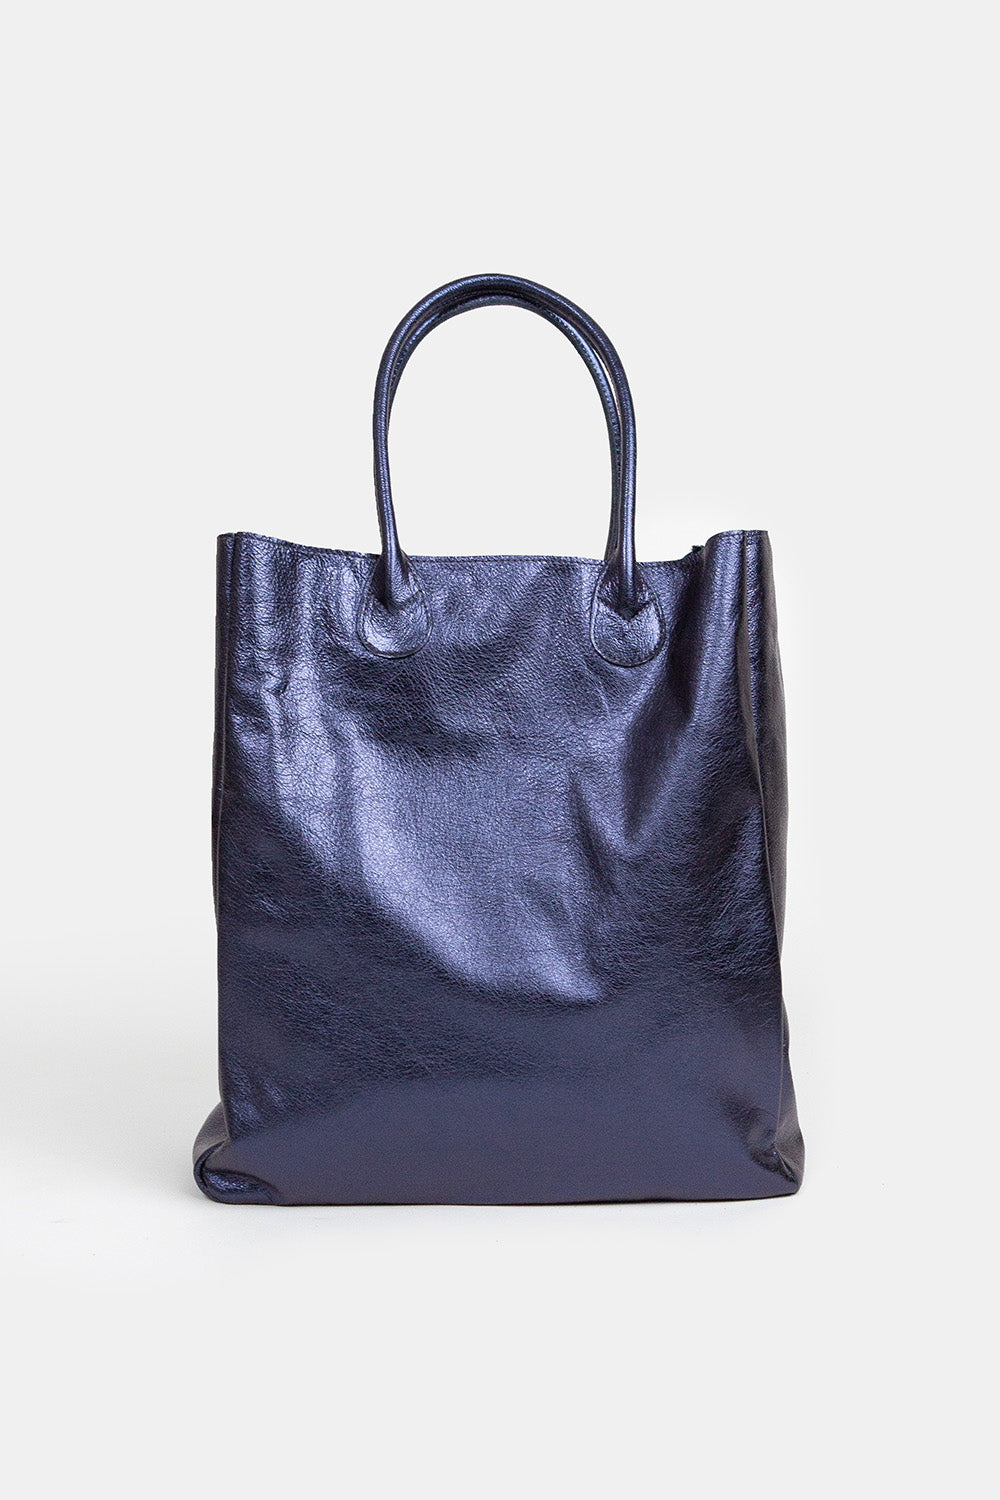 Eve Leather Shopping Tote in Sapphire